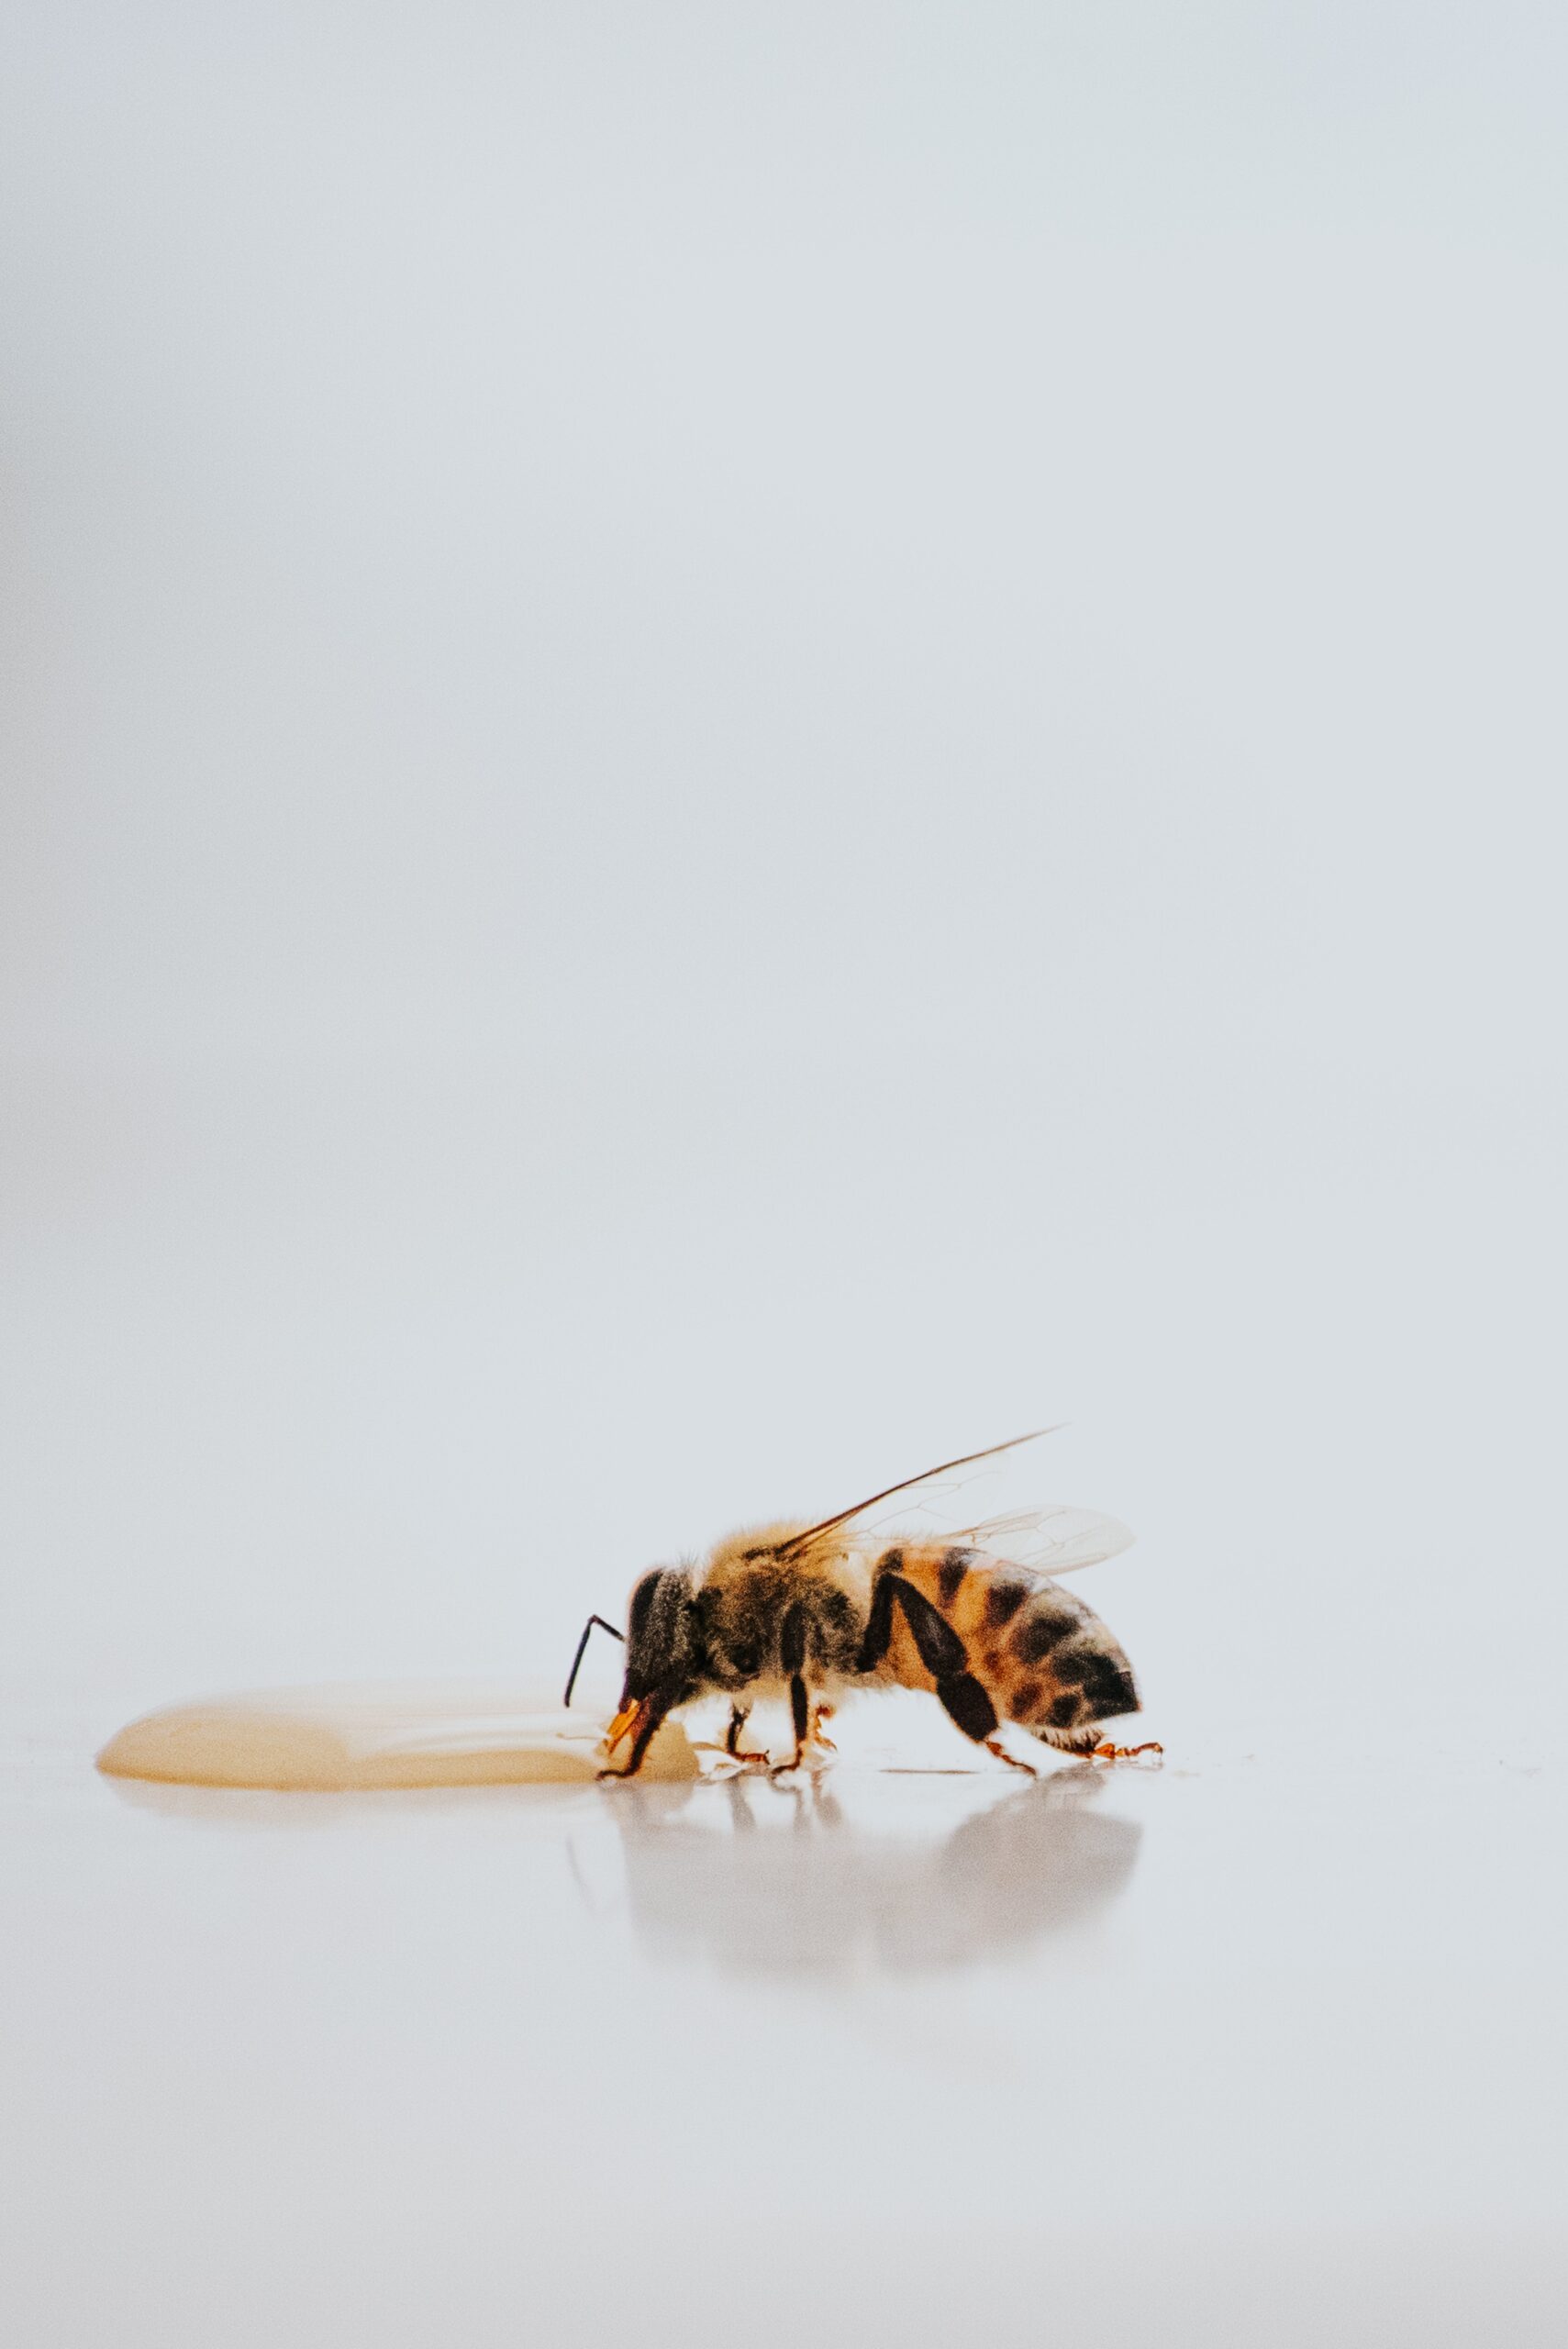 Honey Bee with Honey - Discover What is the 5 Differences Between Raw Honey and Processed Honey